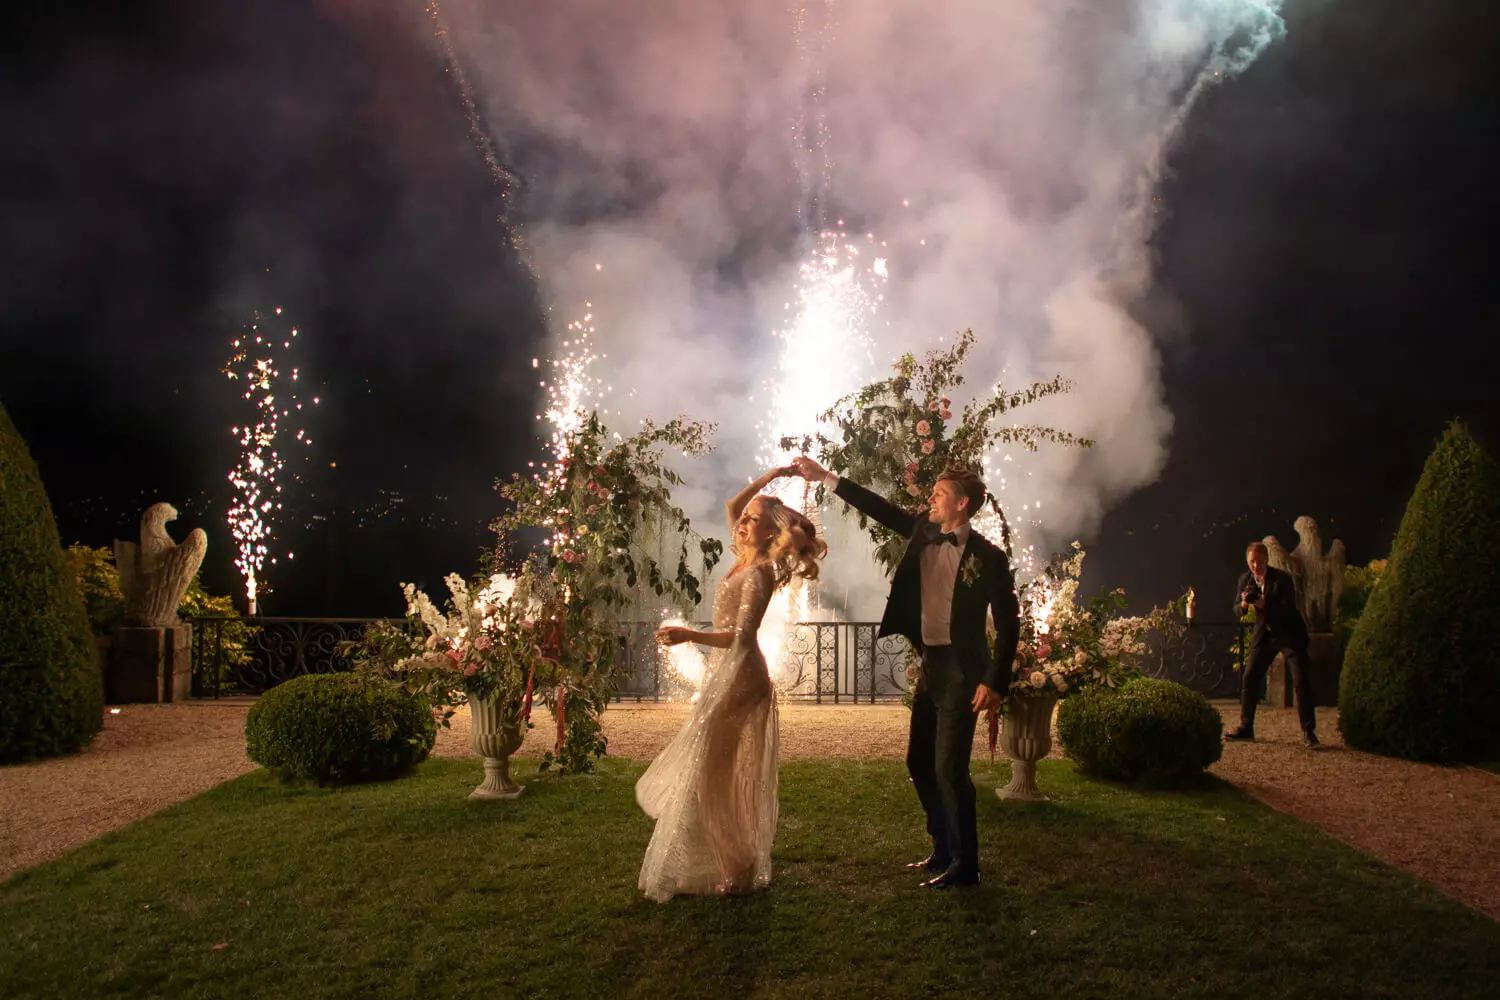 Beautiful wedding event produced by Leslie Mastin Events. Unique elements, fireworks, nighttime party.